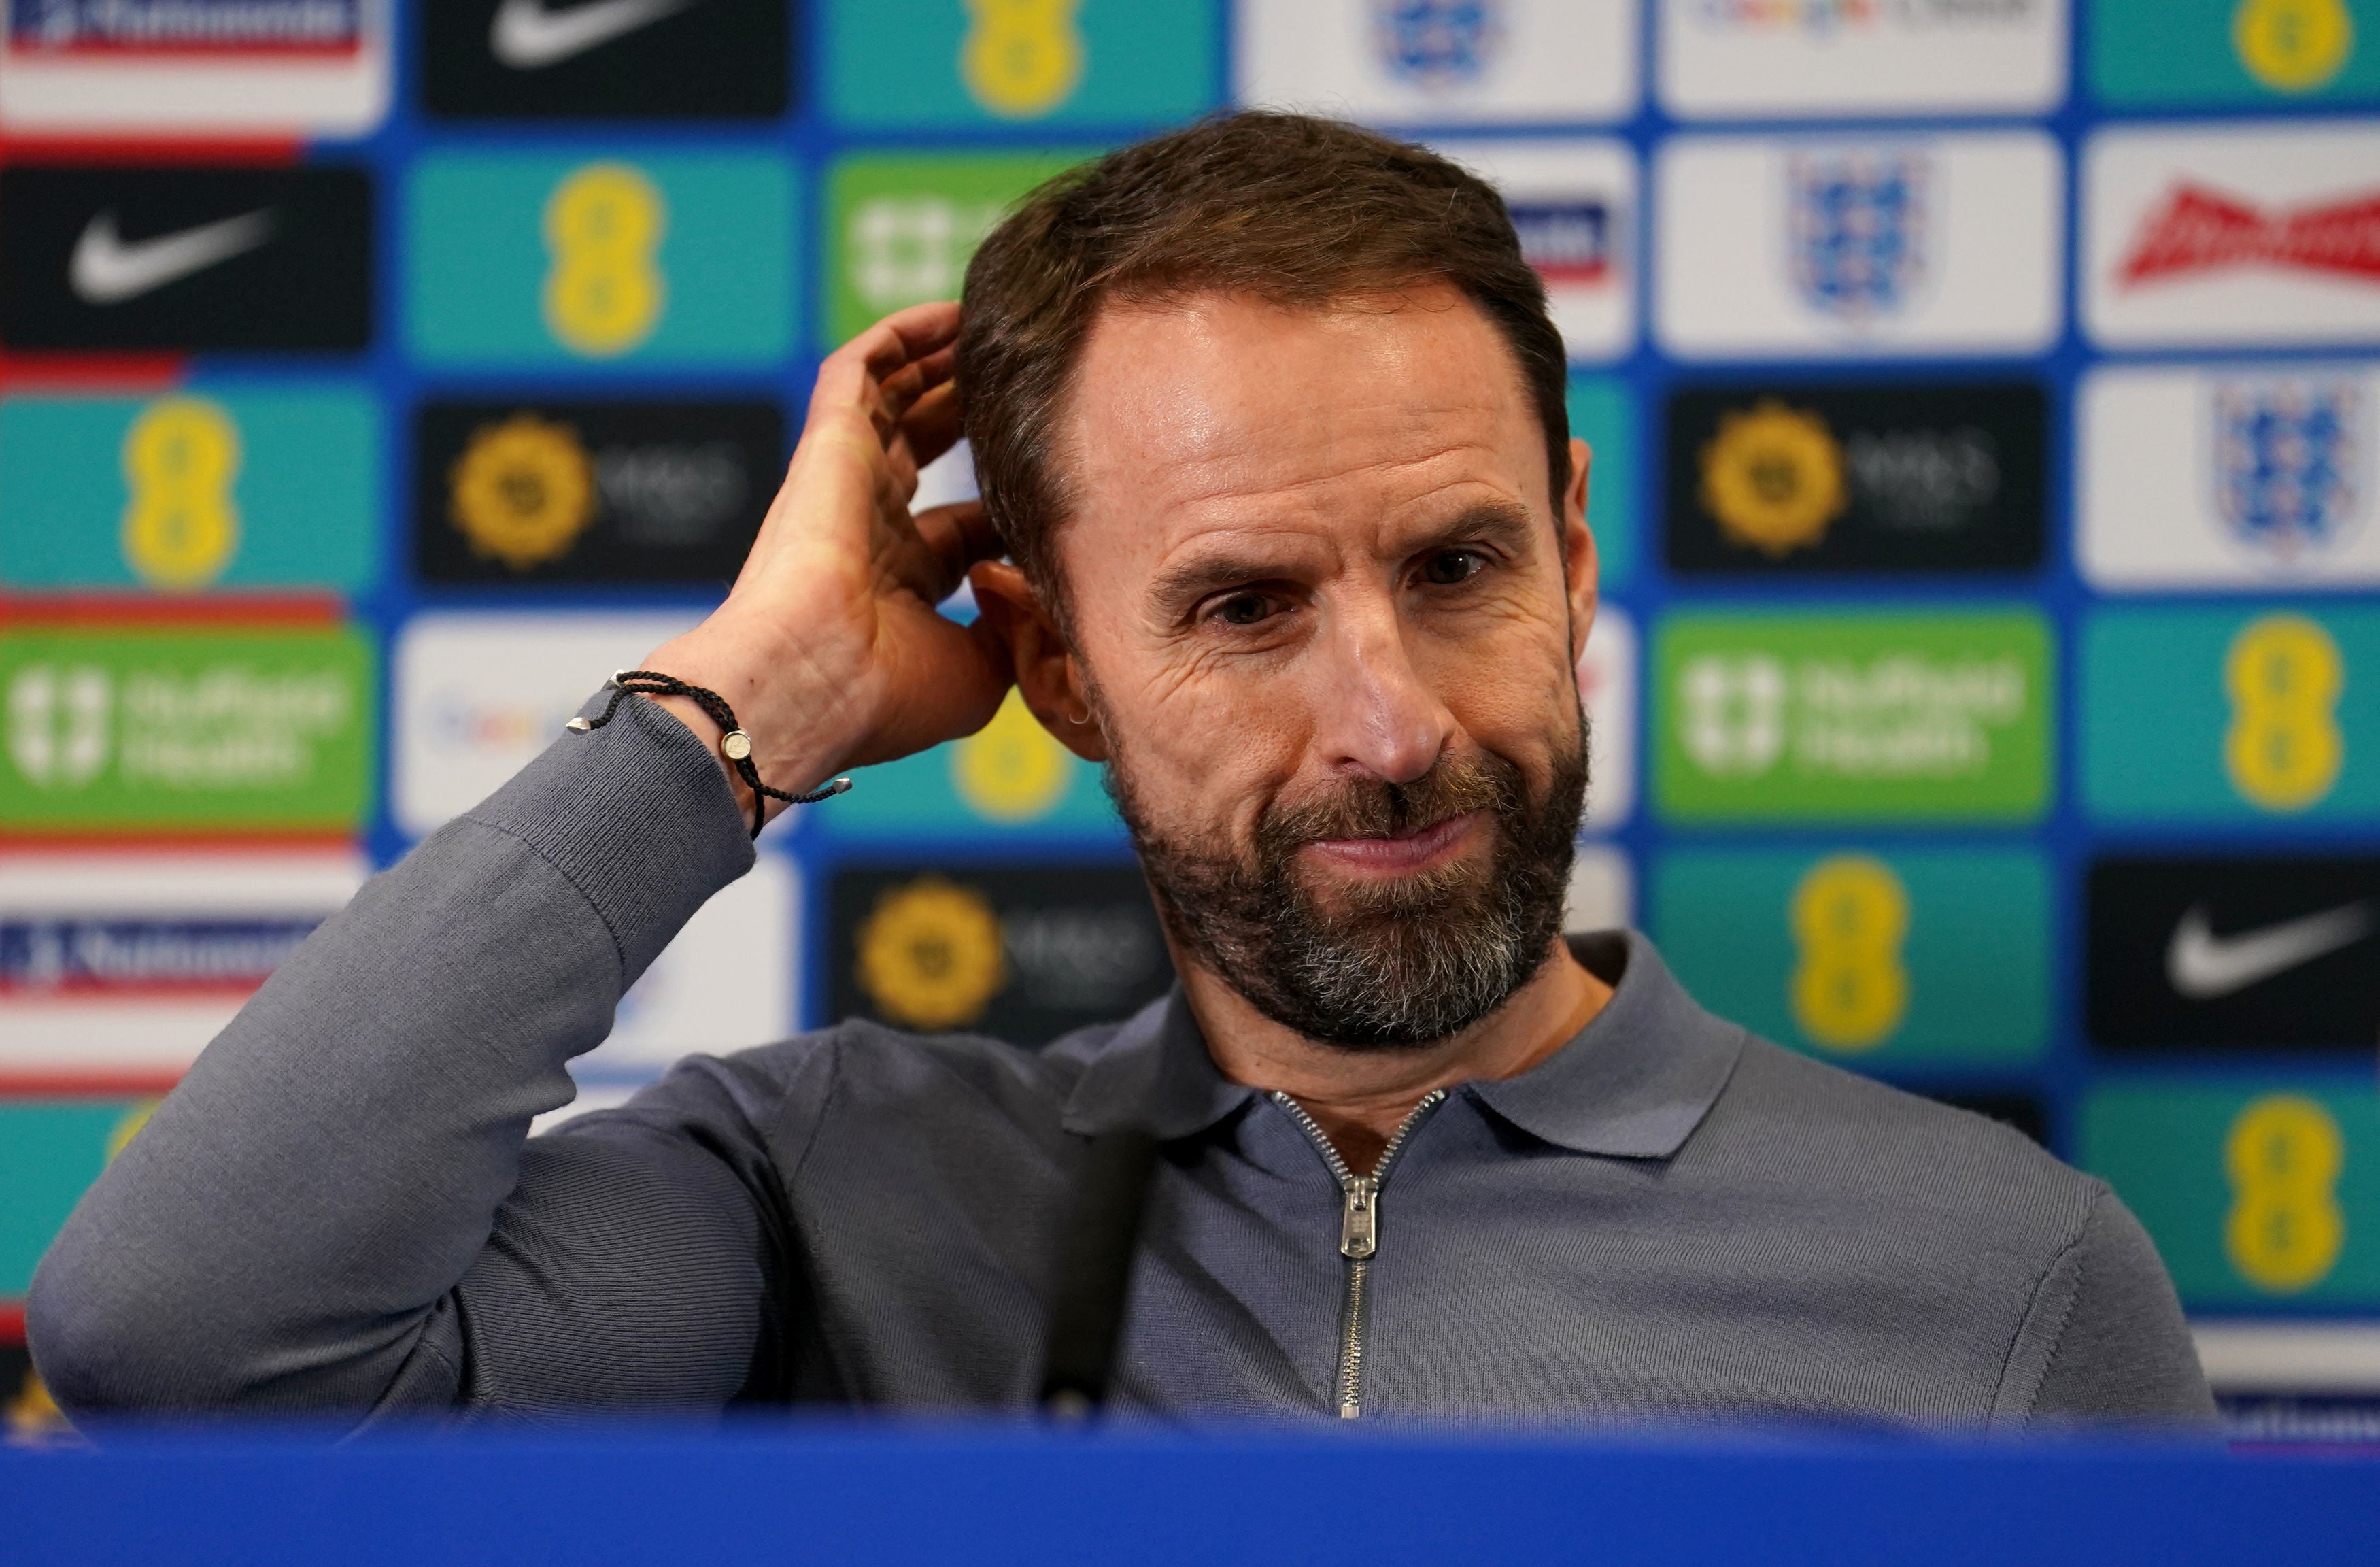 Gareth Southgate speaks to the media at St George’s Park